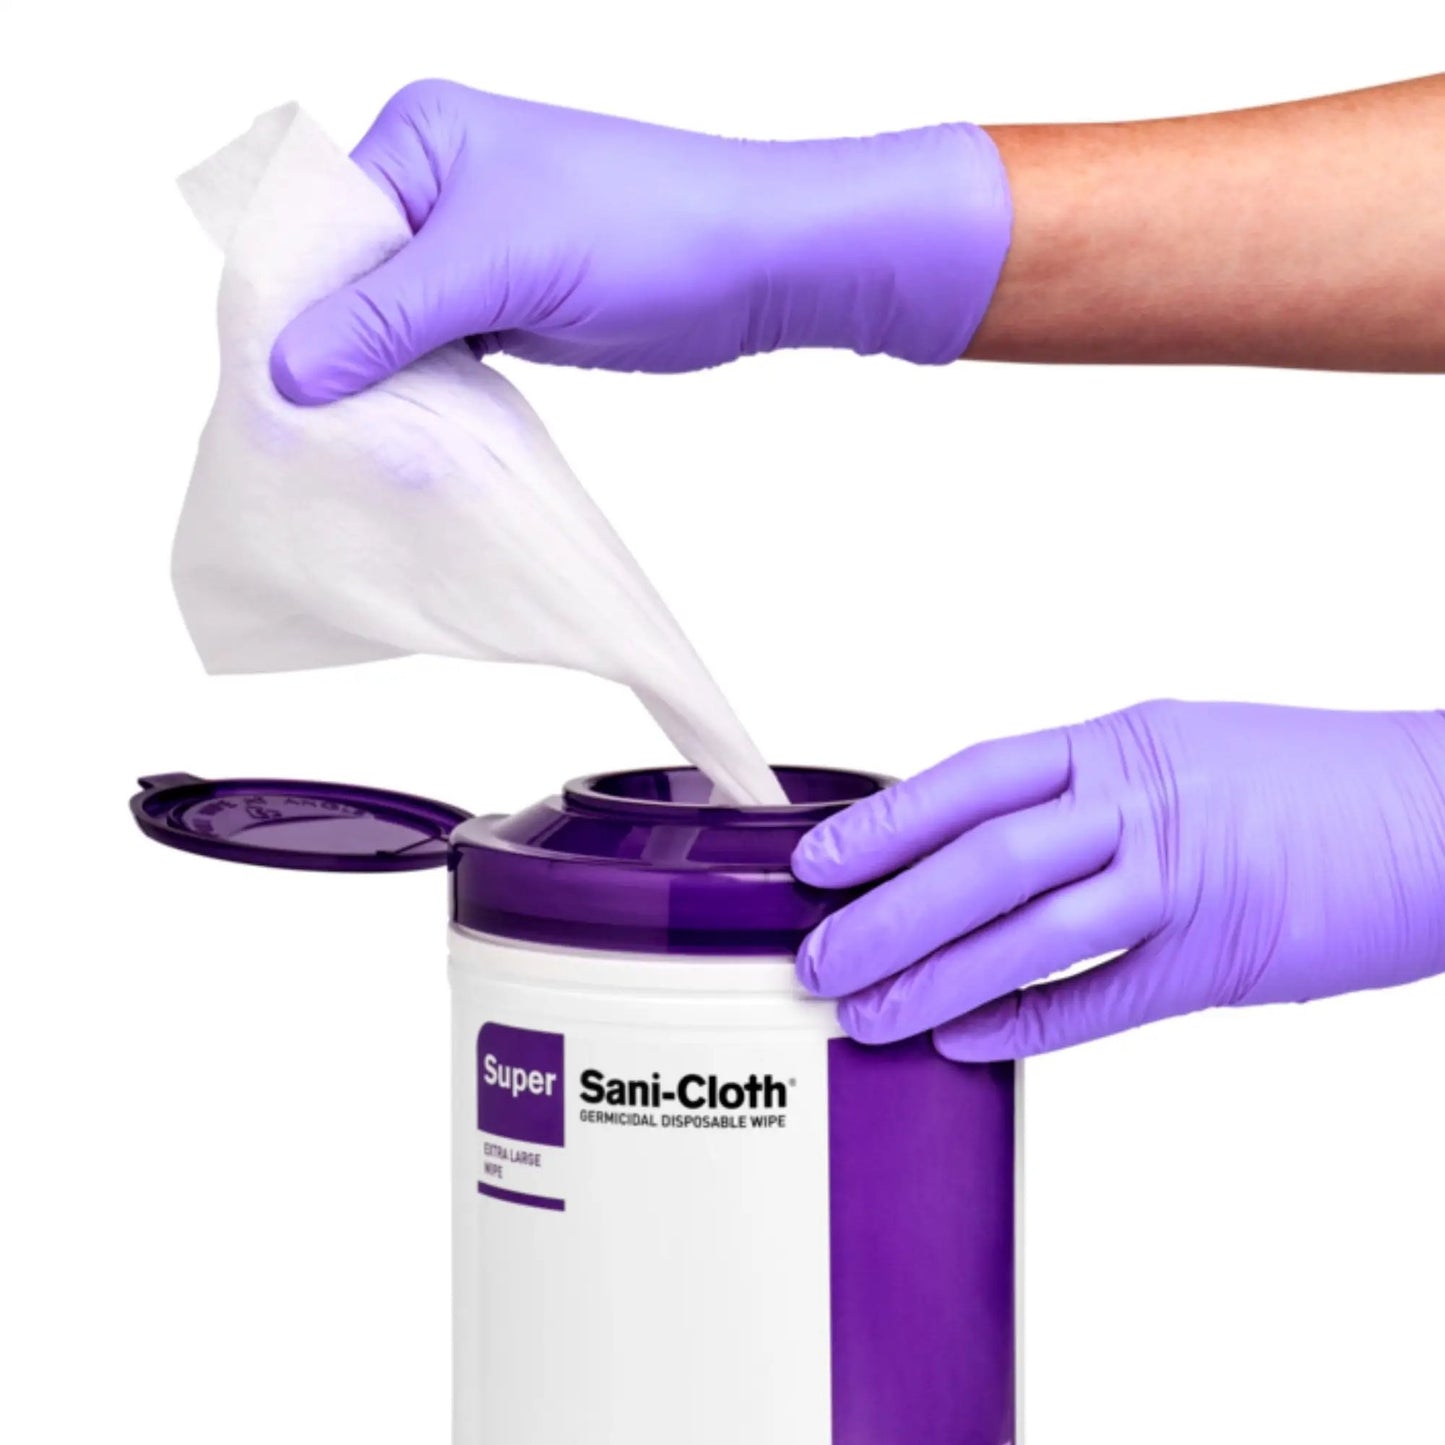 Super Sani-Cloth Surface Disinfectant Wipe, Large Canister 160 Count